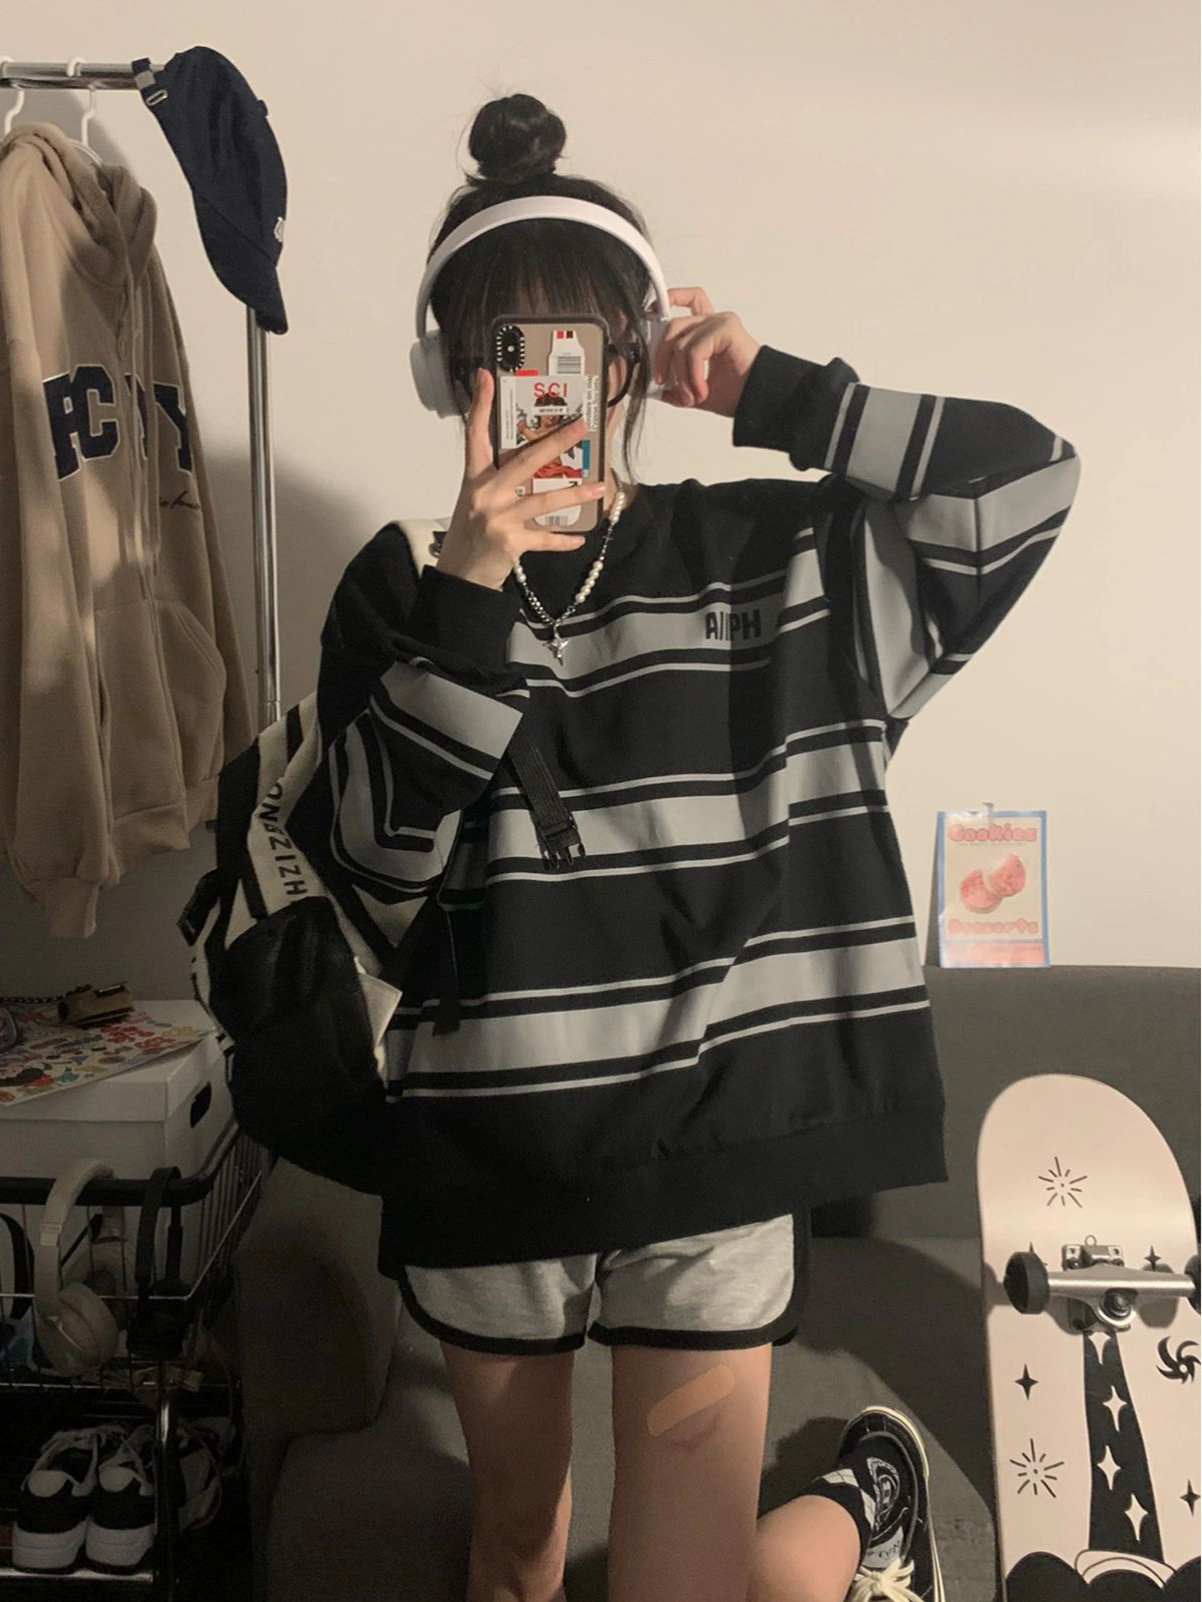 Guochao brand American retro hiphop striped long-sleeved sweater women's spring and autumn thin section loose bf lazy wind top